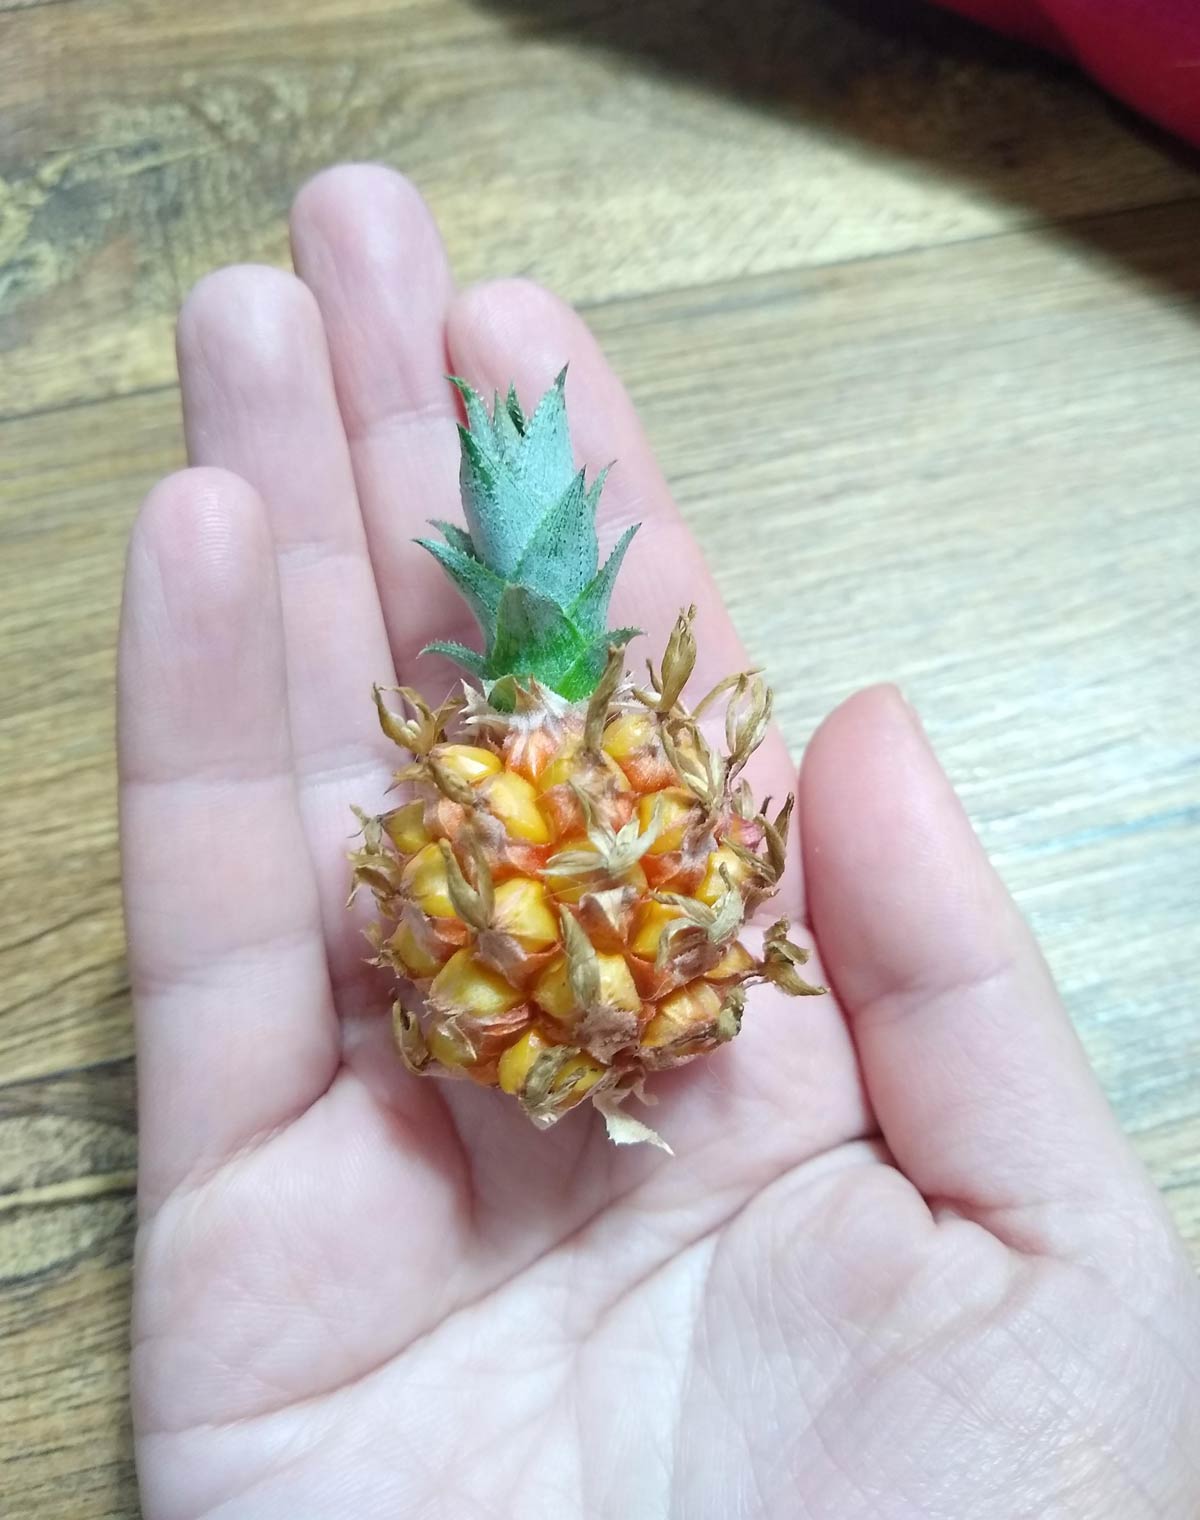 This pineapple I harvested